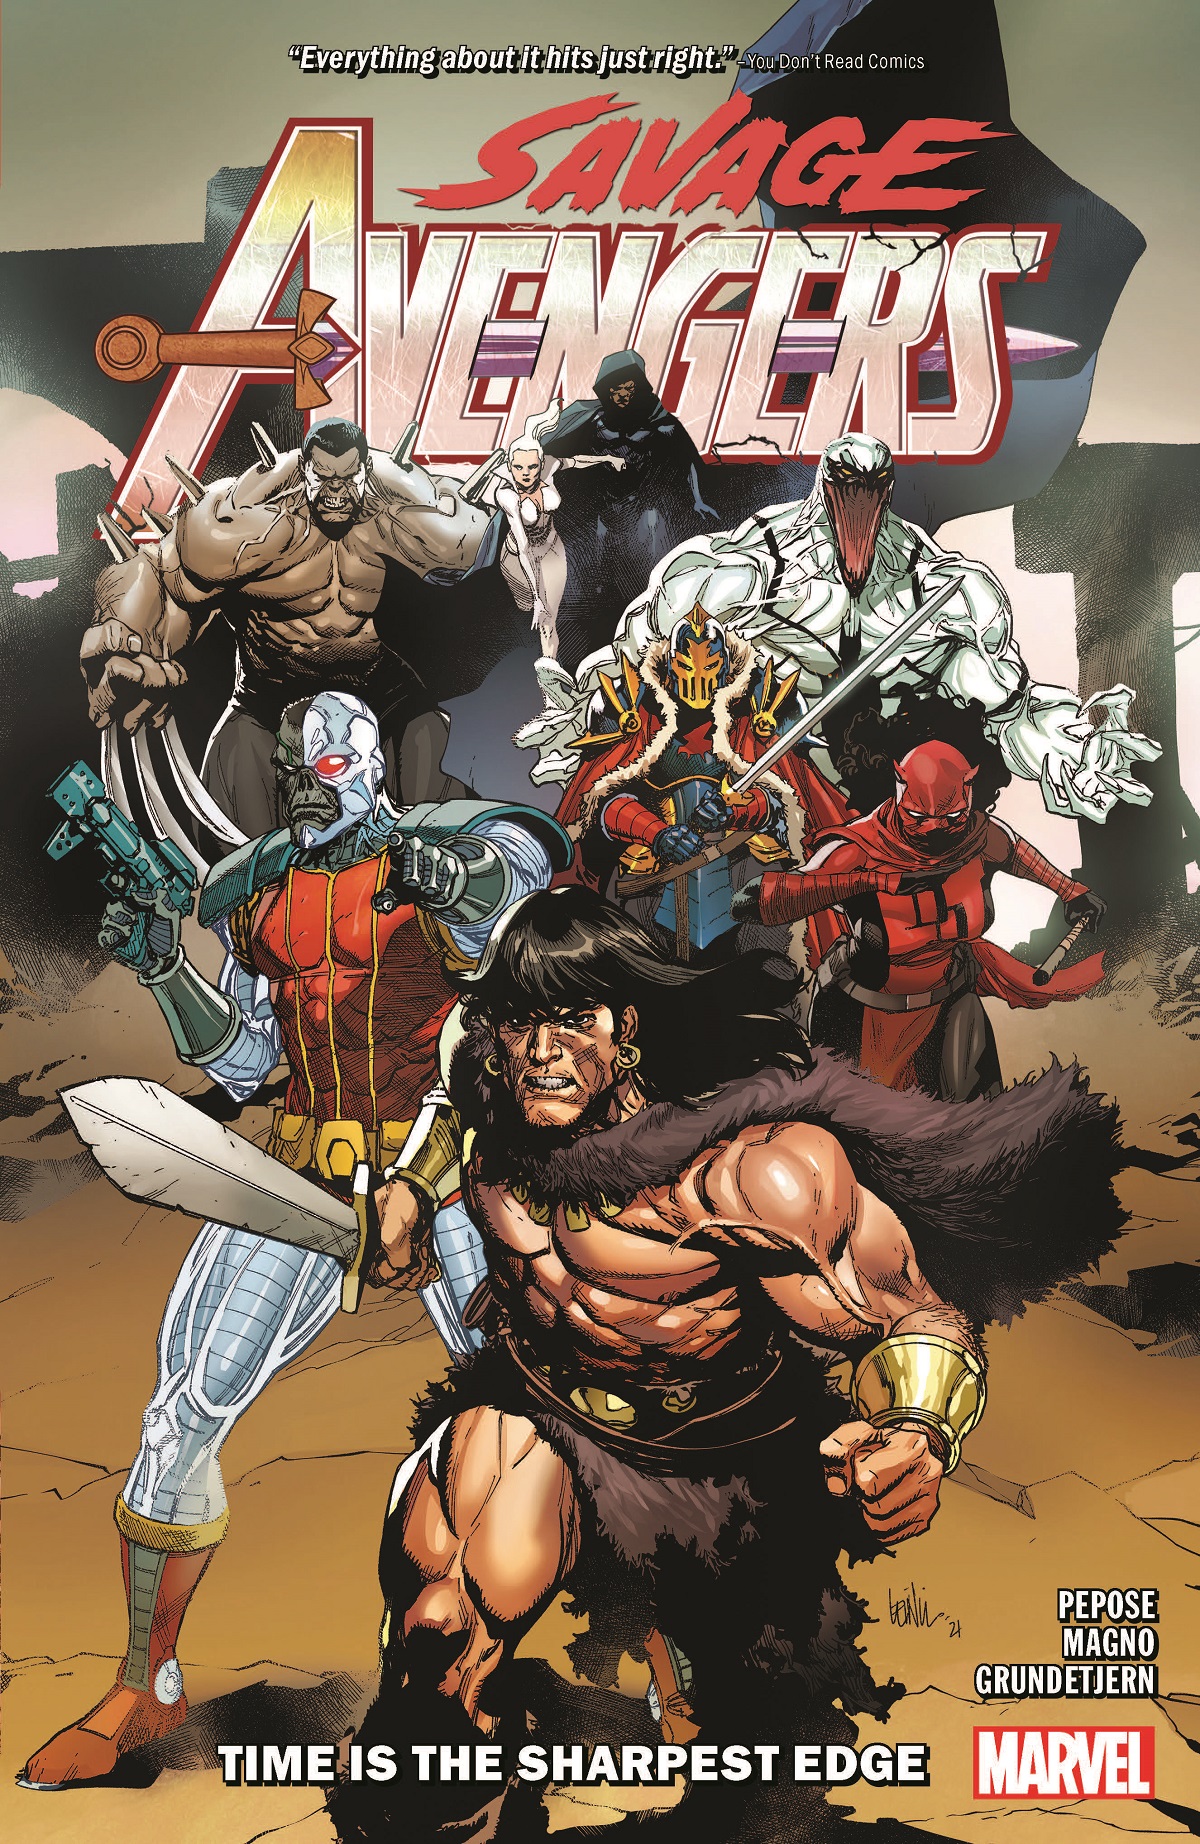 Savage Avengers Vol. 1: Time Is The Sharpest Edge (Trade Paperback)